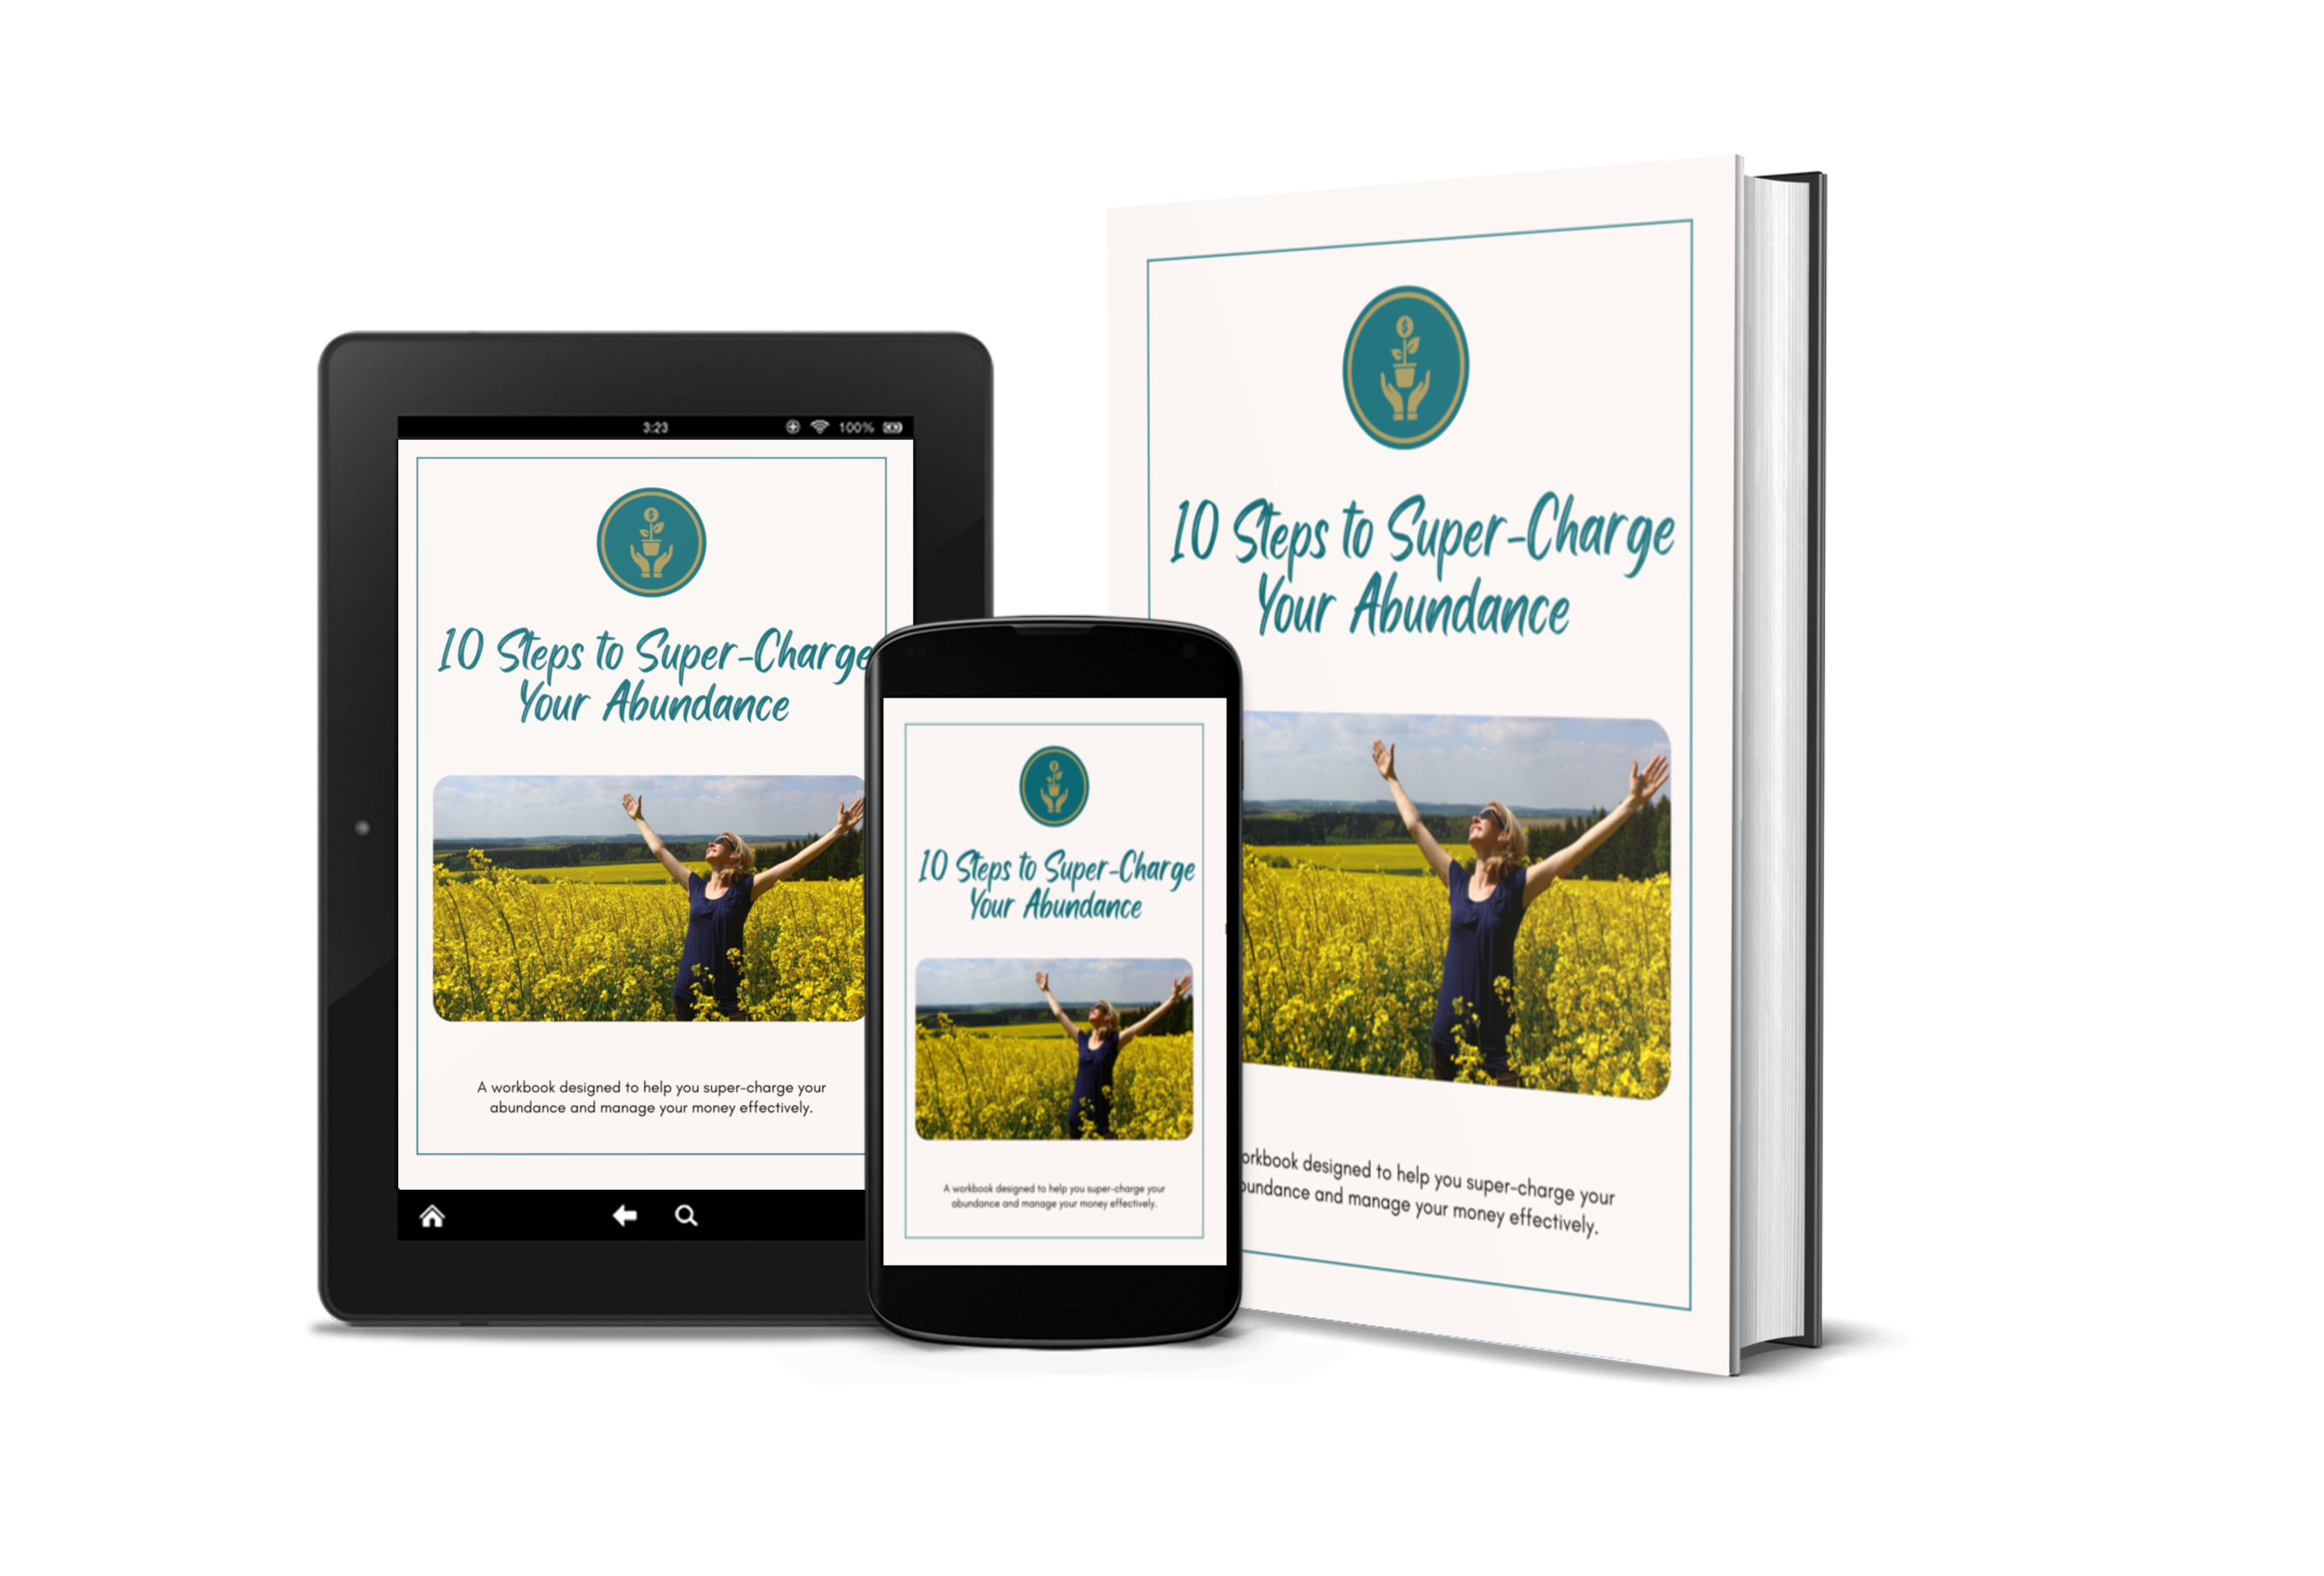 Super-charged your abundance